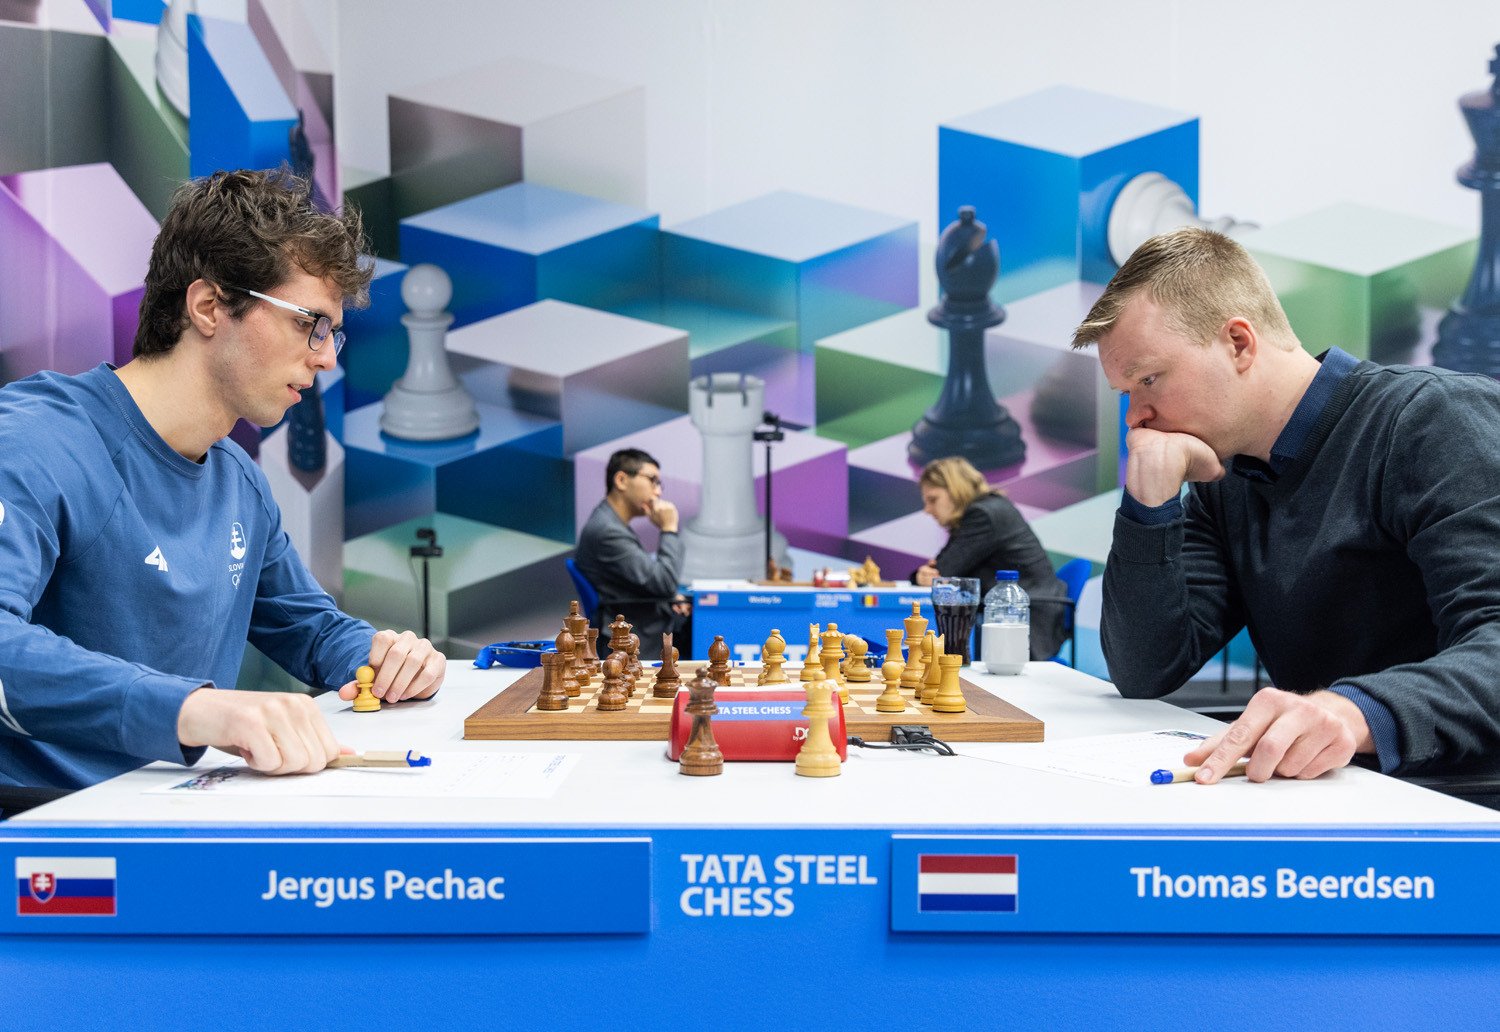 Tata Steel Chess Challengers 2023 - All the Information 